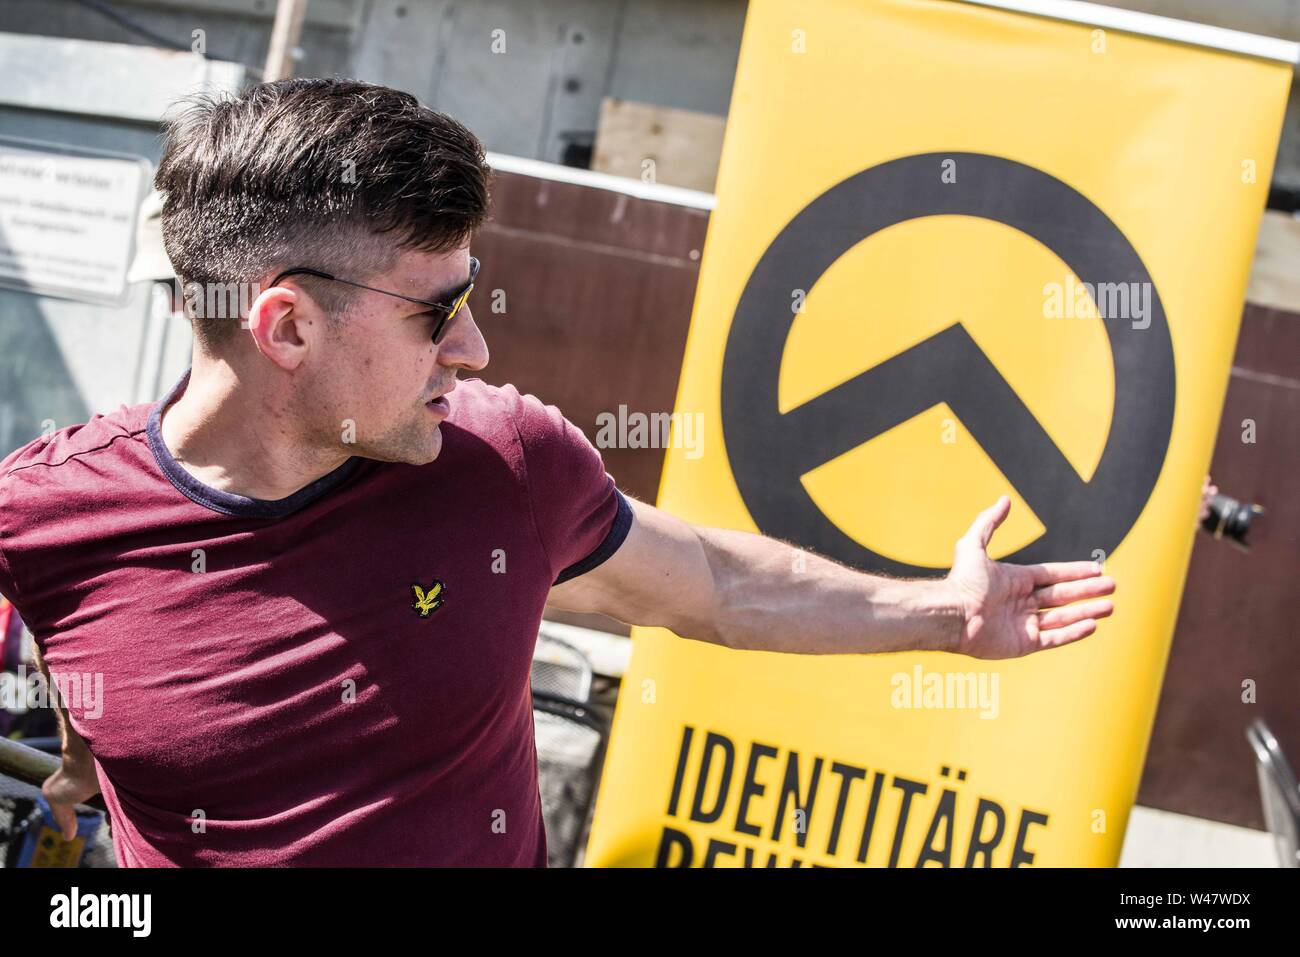 Halle Saale, Sachsen Anhalt, Germany. 20th July, 2019. MARTIN SELLNER, head of the Identitaere Bewegung (Identitaeren Movement). Sellner is a prominent figure of the alt right and international white supremacist movements. He is currently banned from traveling to the United States and has a permanent ban from entering the United Kingdom. Amid protests, the white supremacist, right extremist Identitaere Bewegung (Generation Identity, Identitaren Movement) held a rally in Halle (Saale). The Identitaere have recently faced numerous challenges, including raids to explore the connection of its h Stock Photo